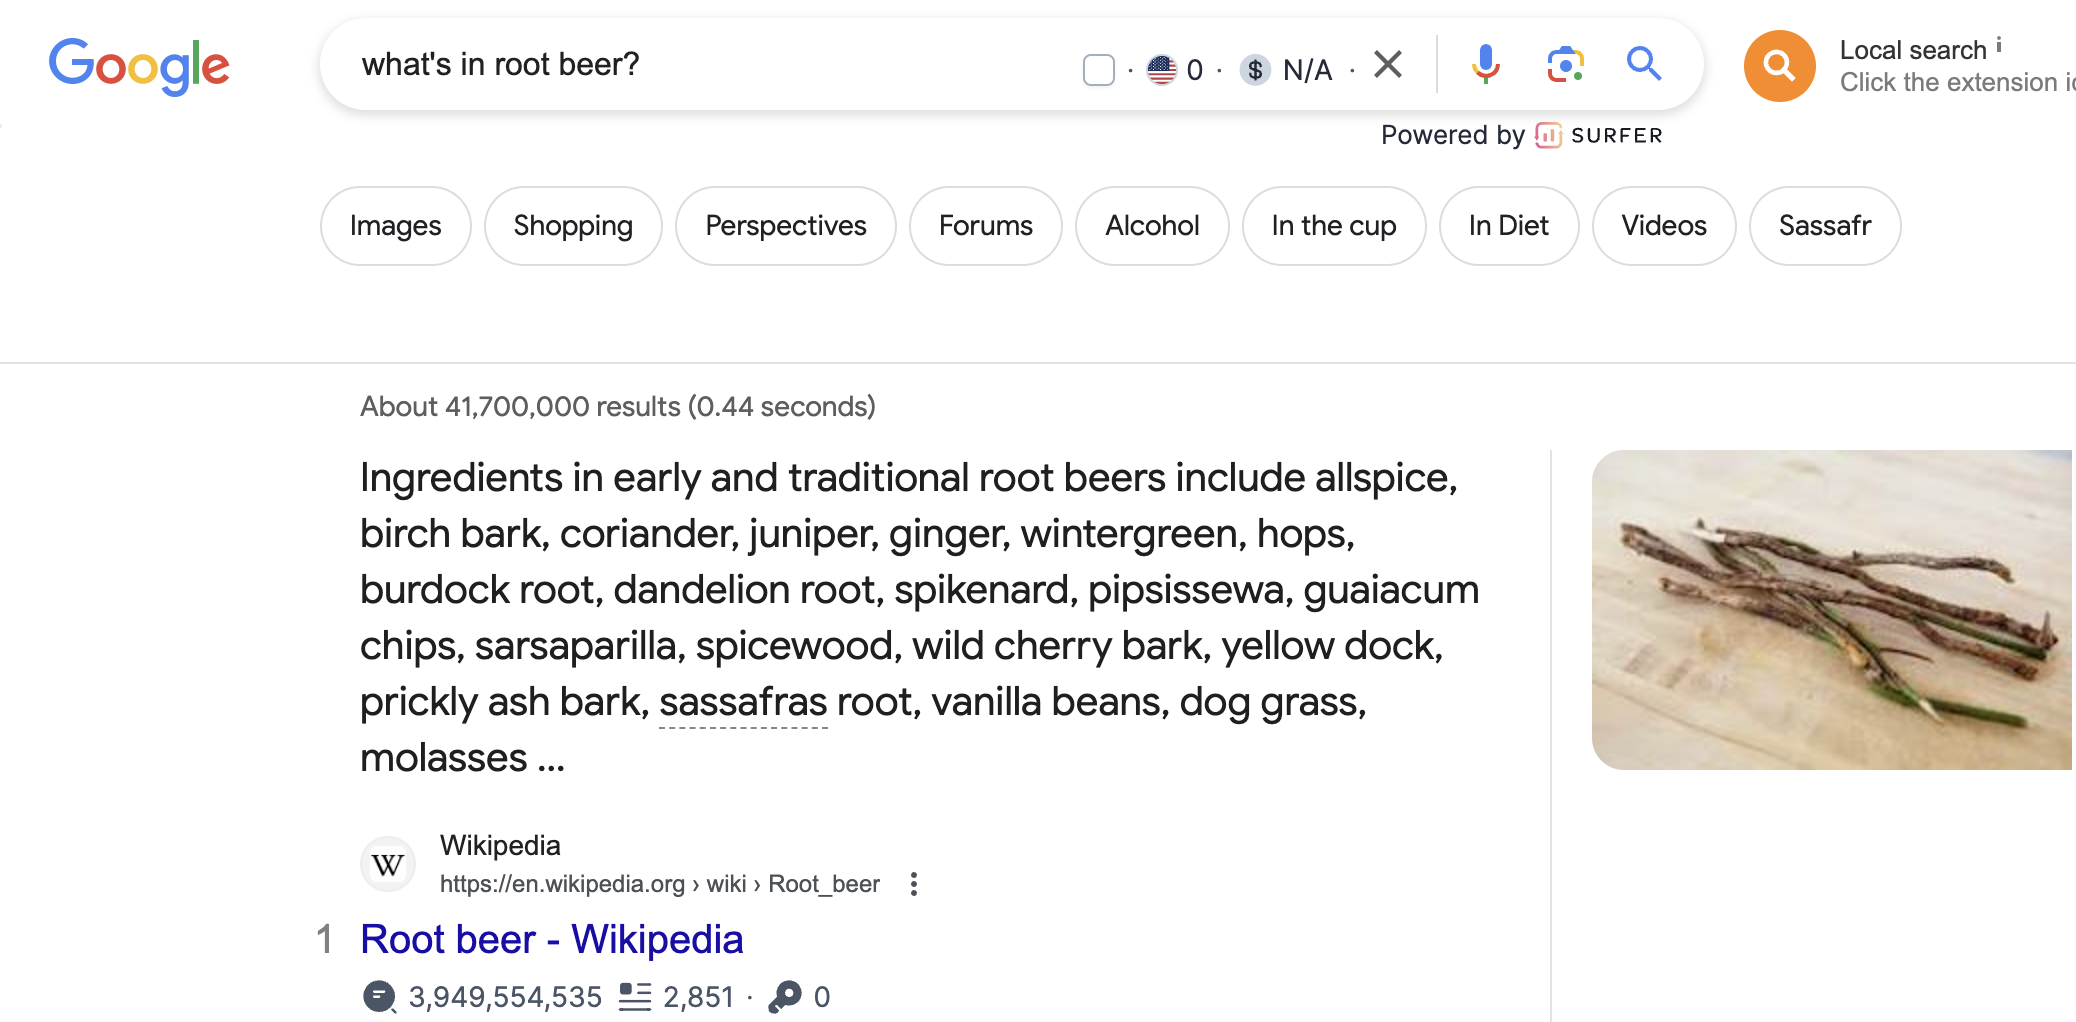 Example of a search result page "what's in root beer?"